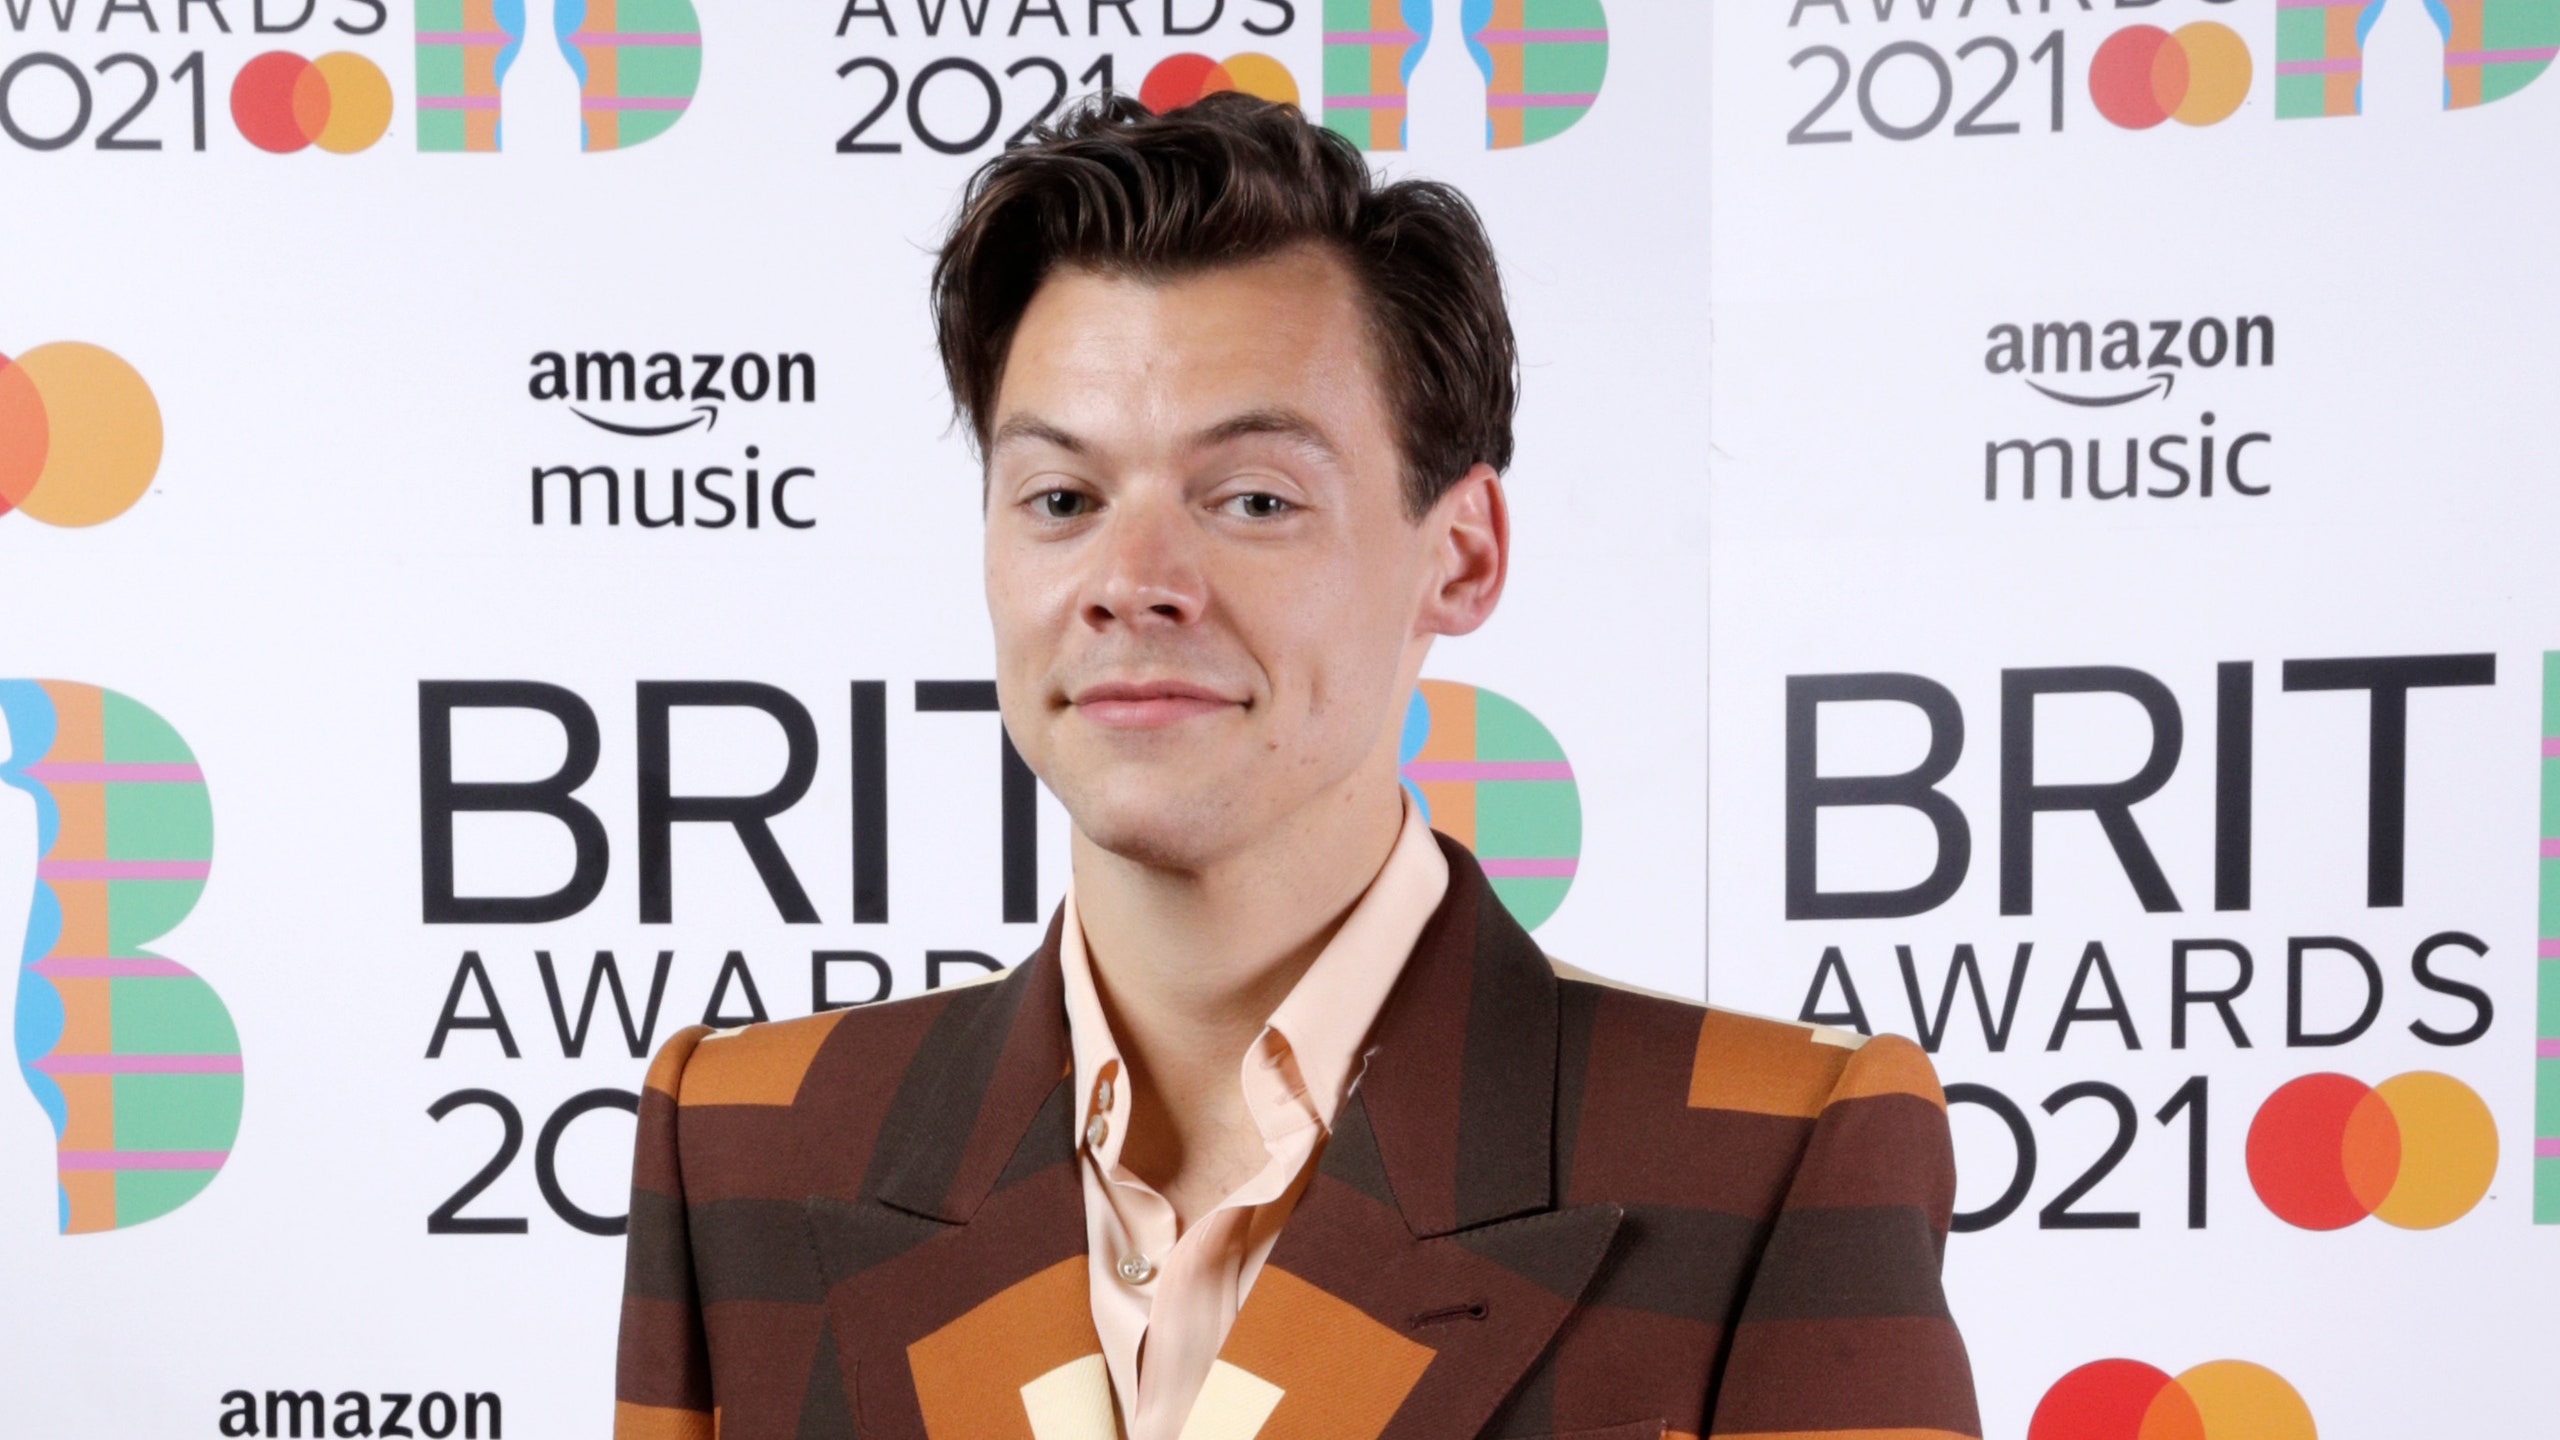 Harry Styles Will Release Third Album “Harry's House” In May